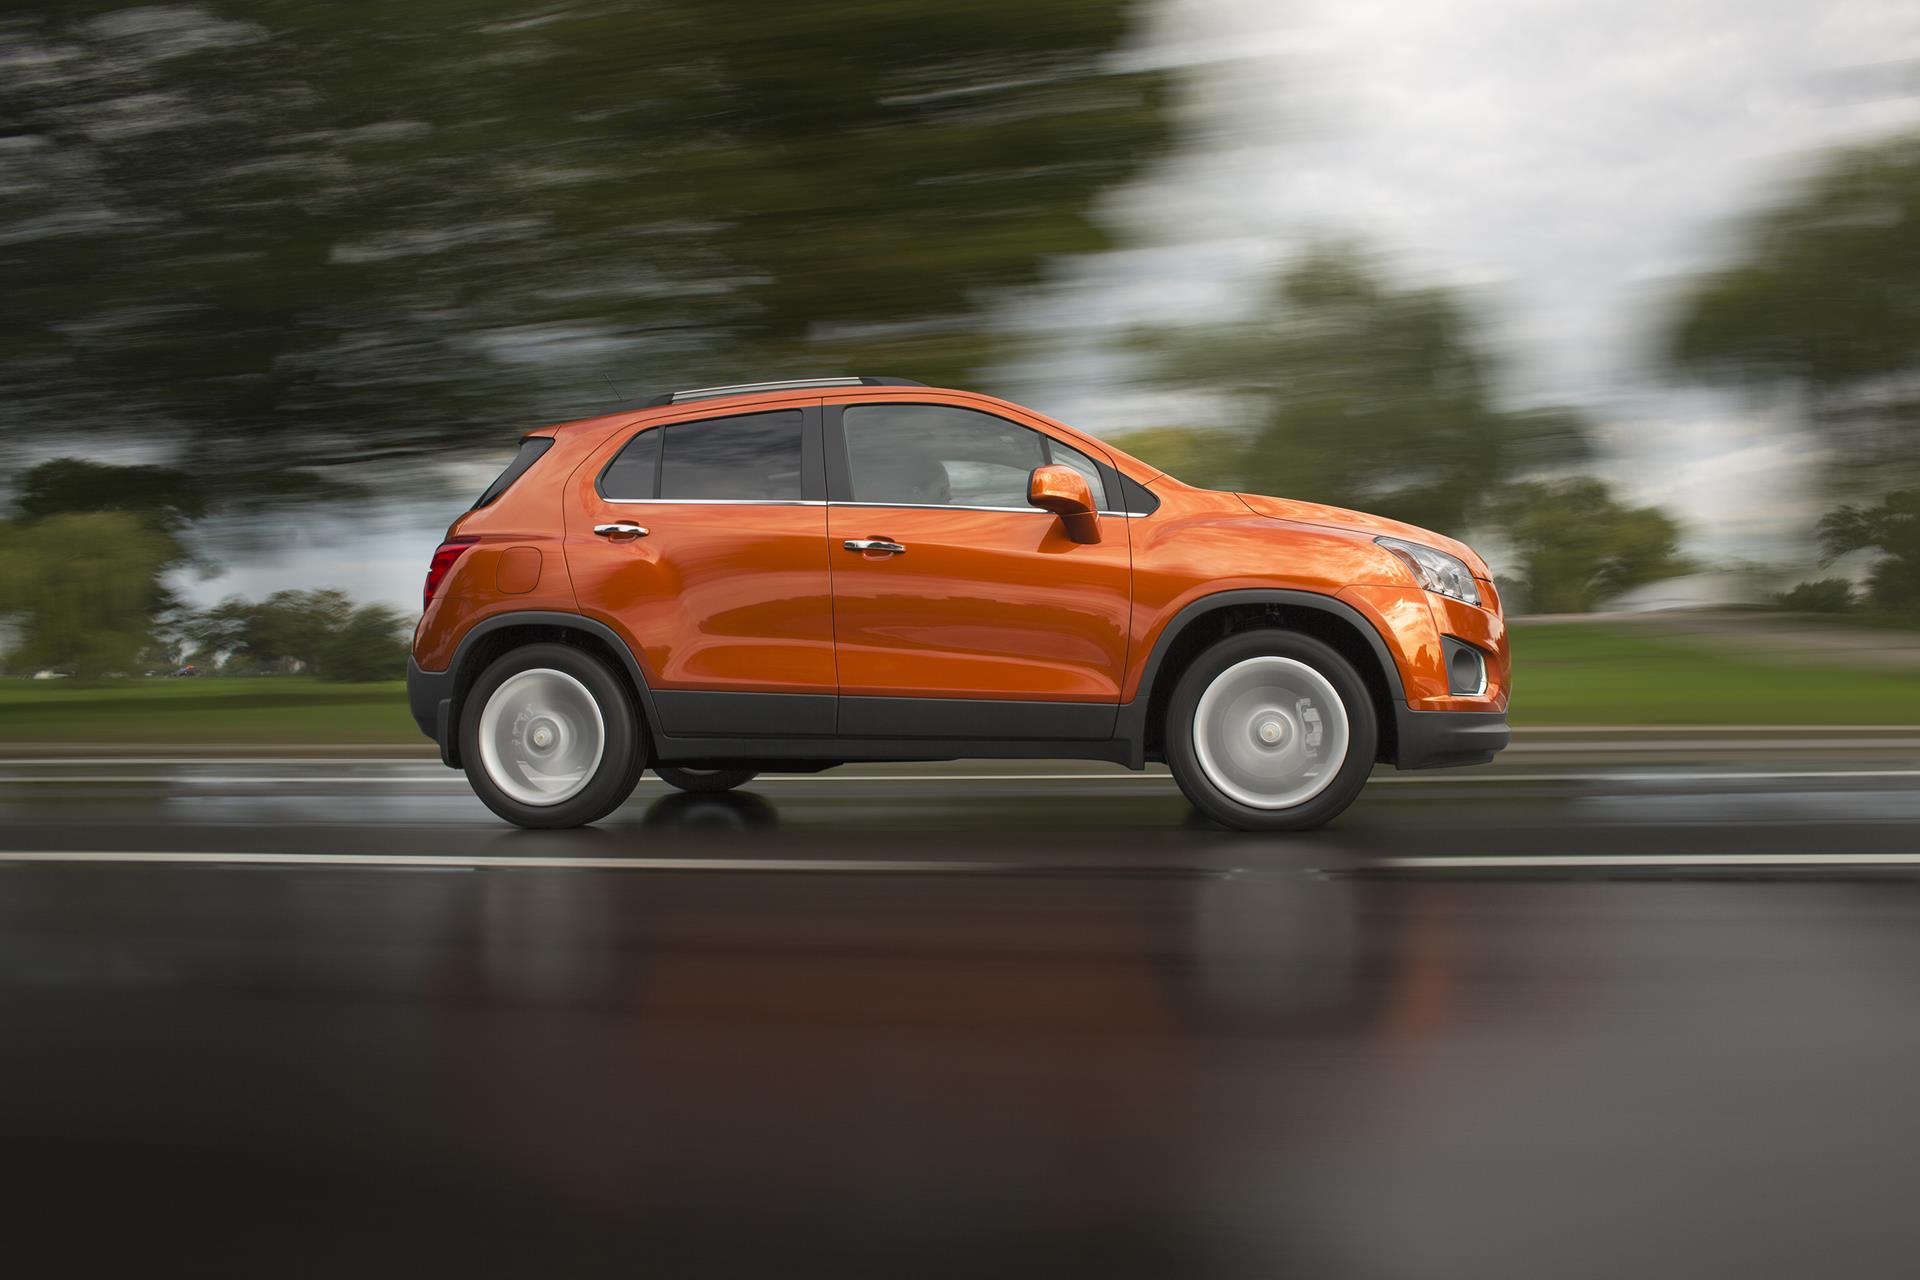 20 WAYS THE ALL-NEW CHEVROLET TRAX MAKES ITS MARK